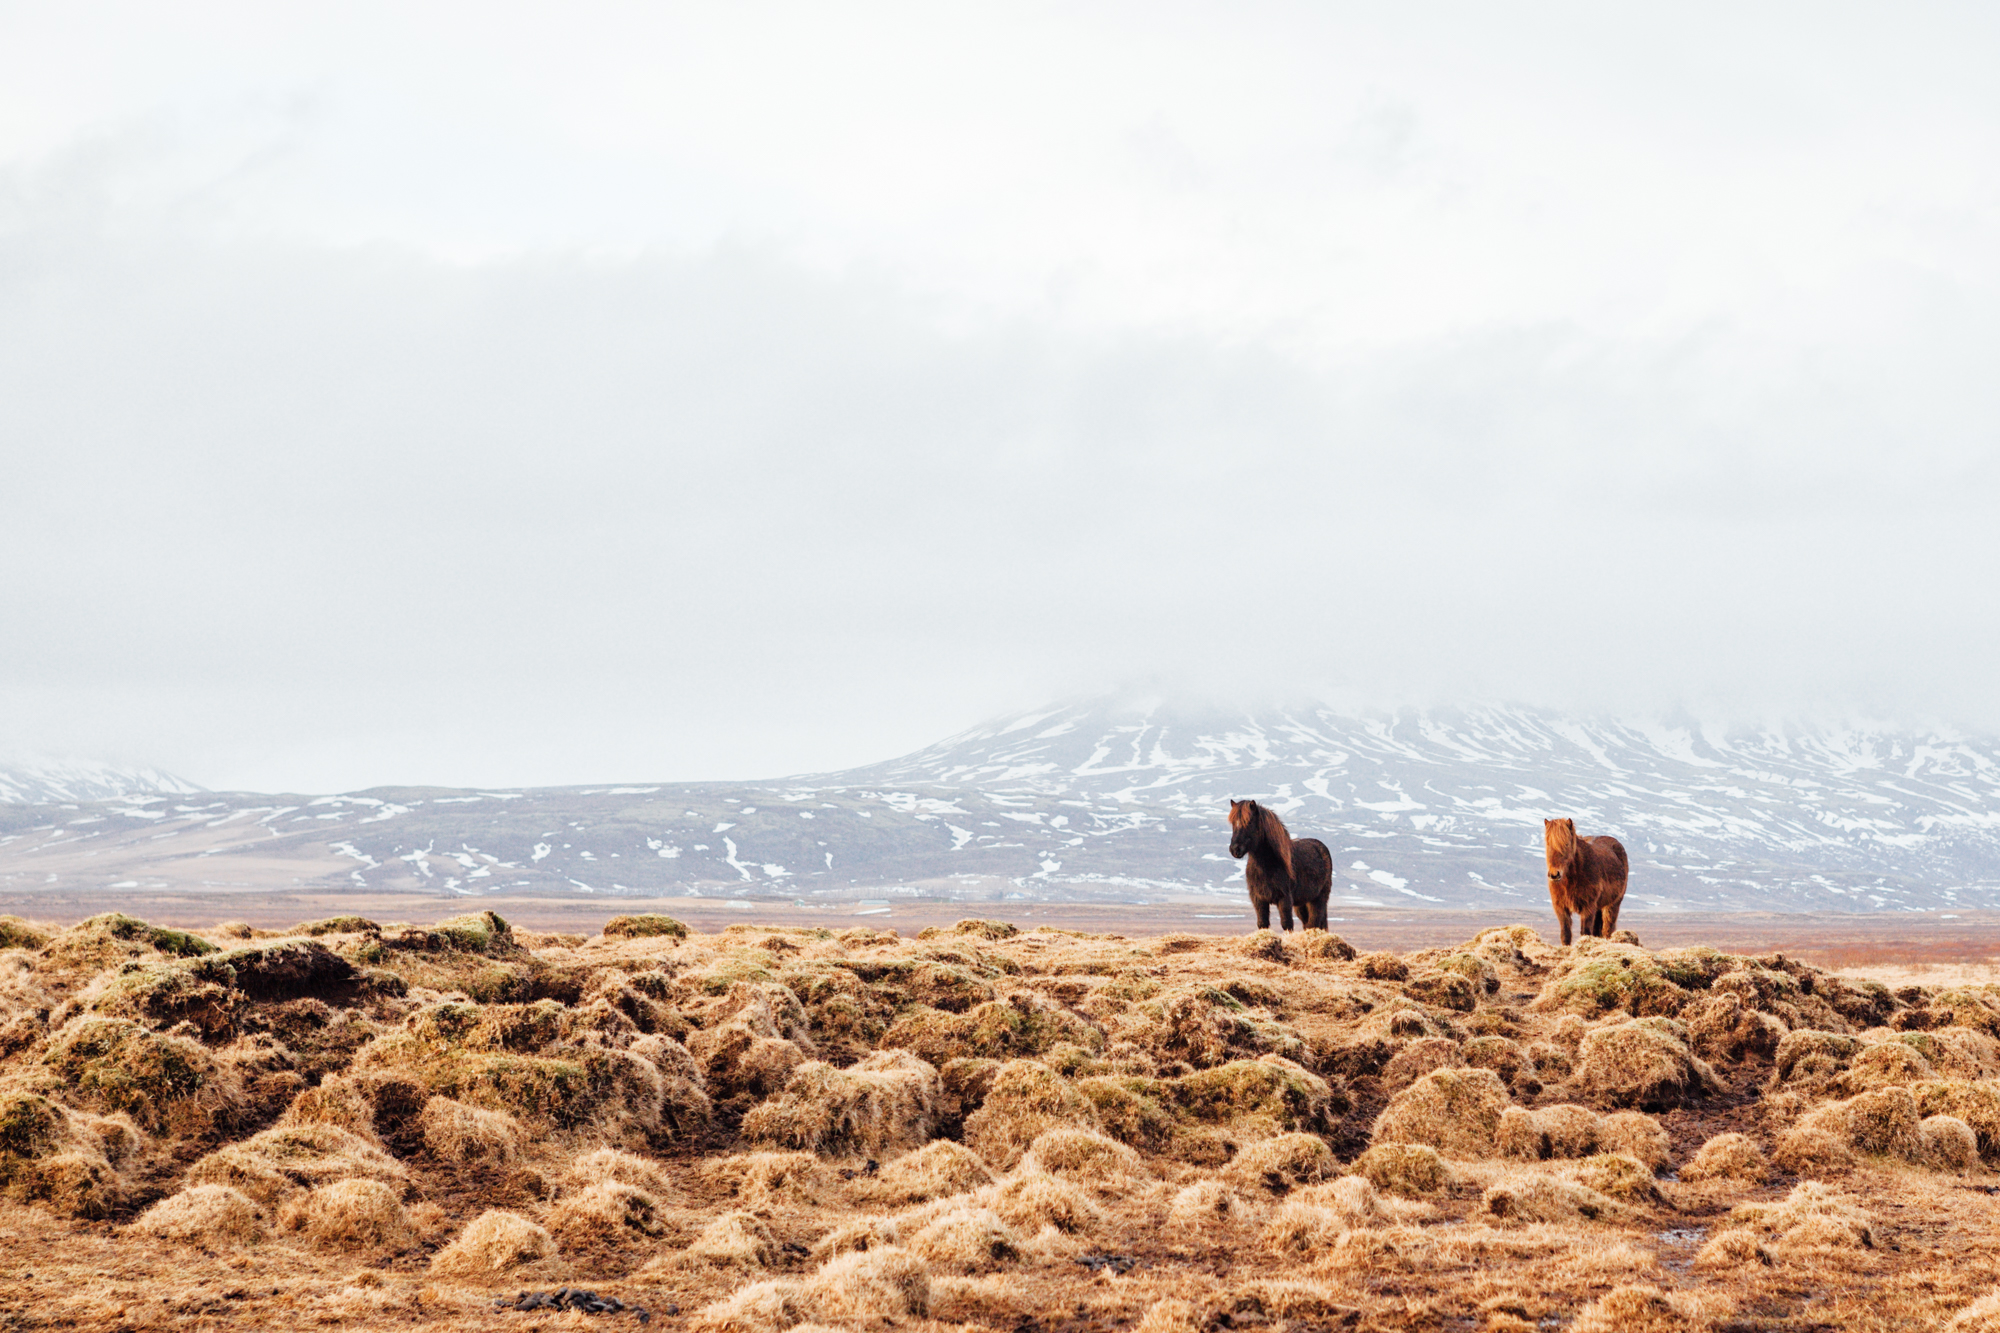  Had to finish the photo series with a pony shot, of course! This was taken on the way to our last stop on the Golden Circle, (the Kerid Crater - which didn’t make for great photos) before we headed to our Reykjavik hotel to crash before flying out t